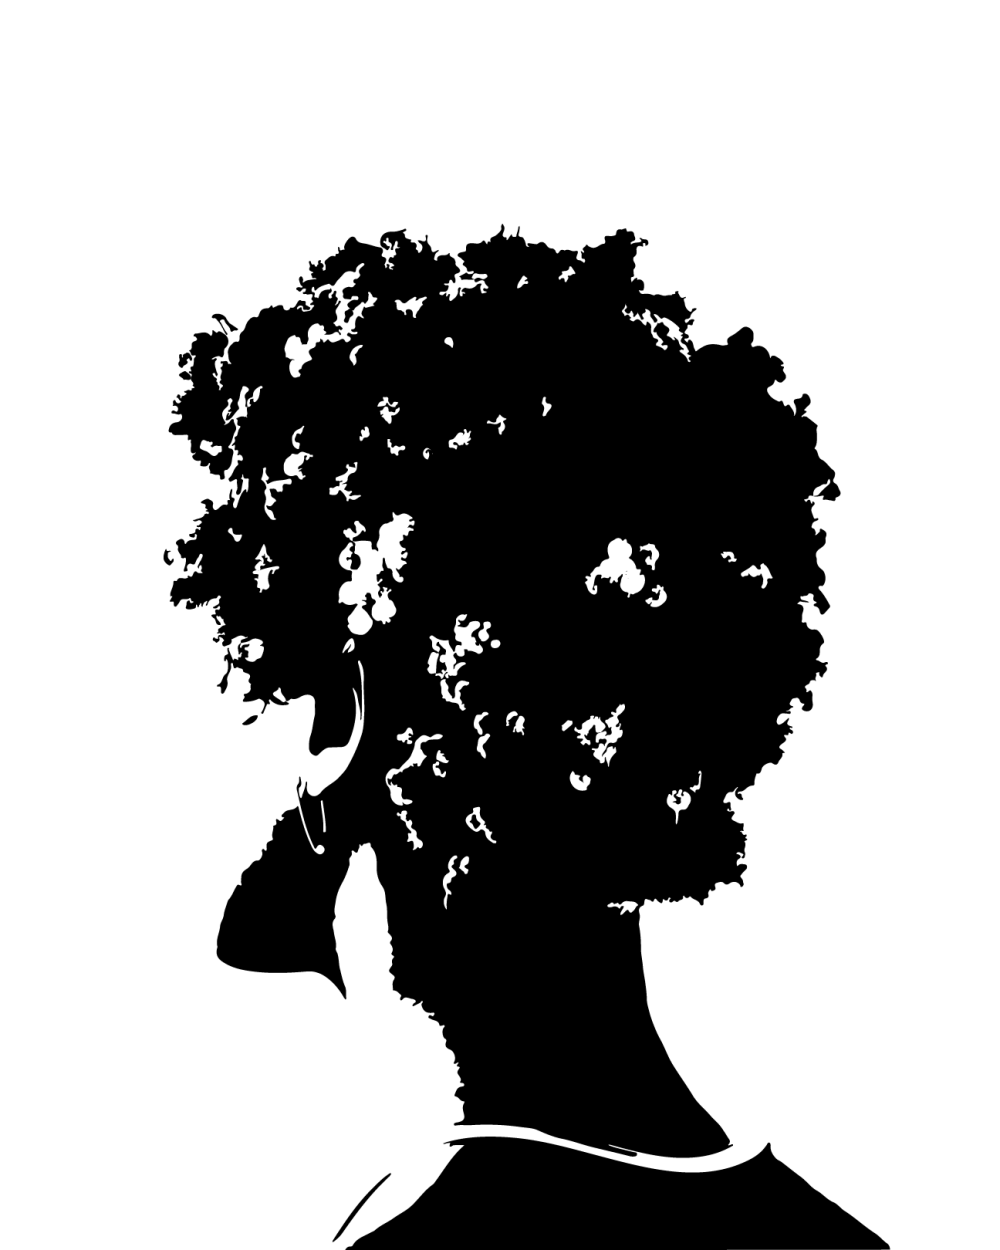 Black illustration of a person with an afro